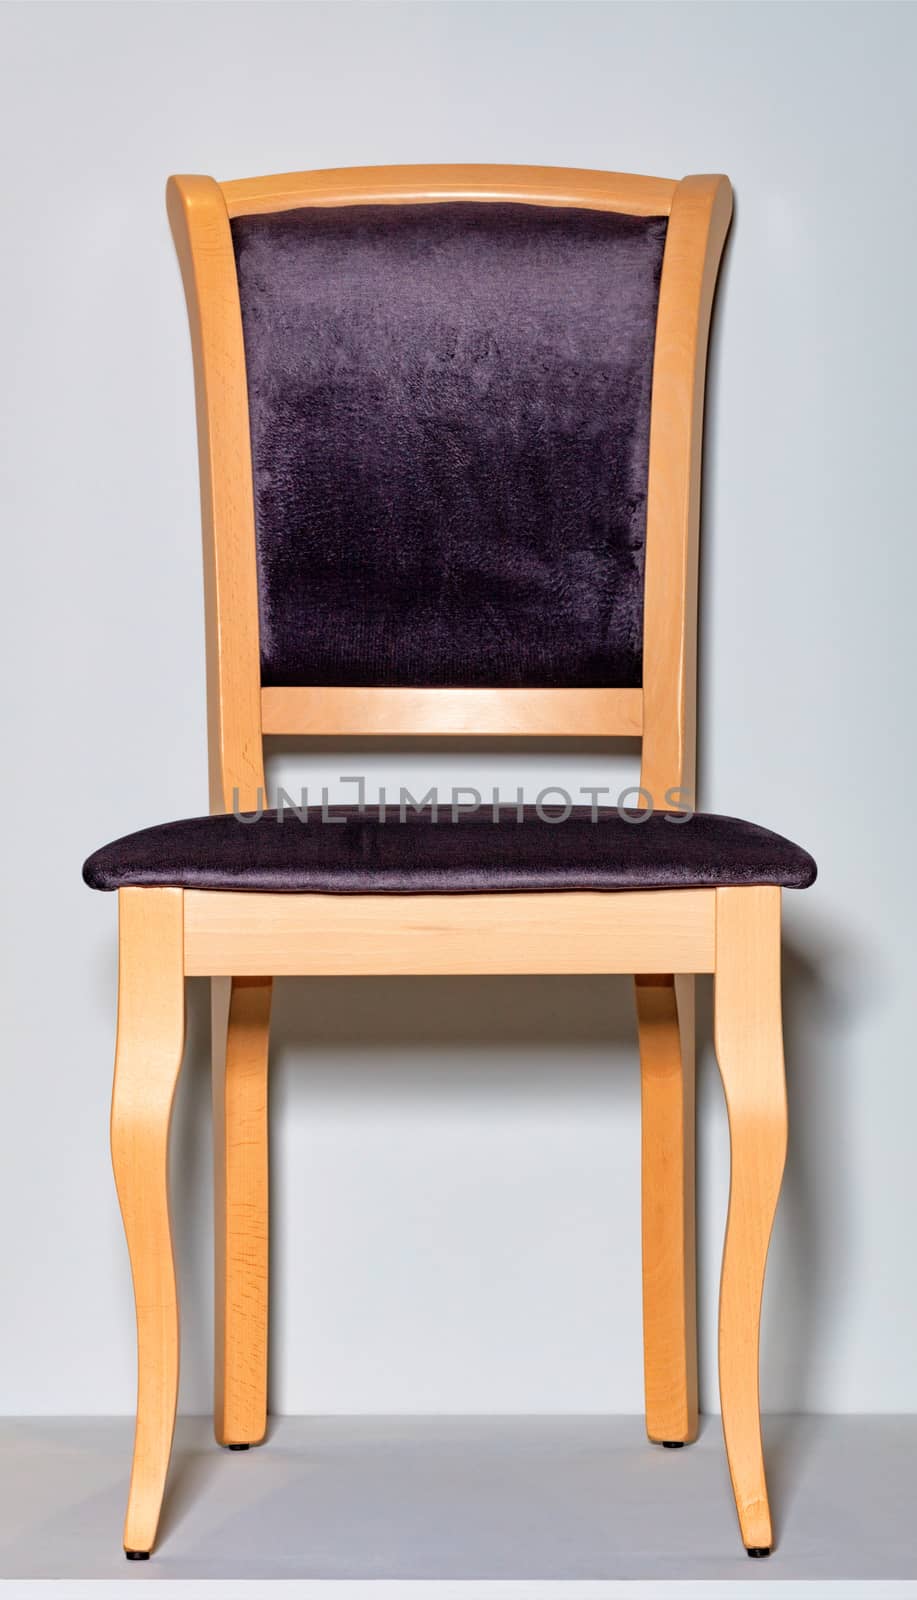 Wooden chair with a soft saddle on a gray podium and background. by Sergii